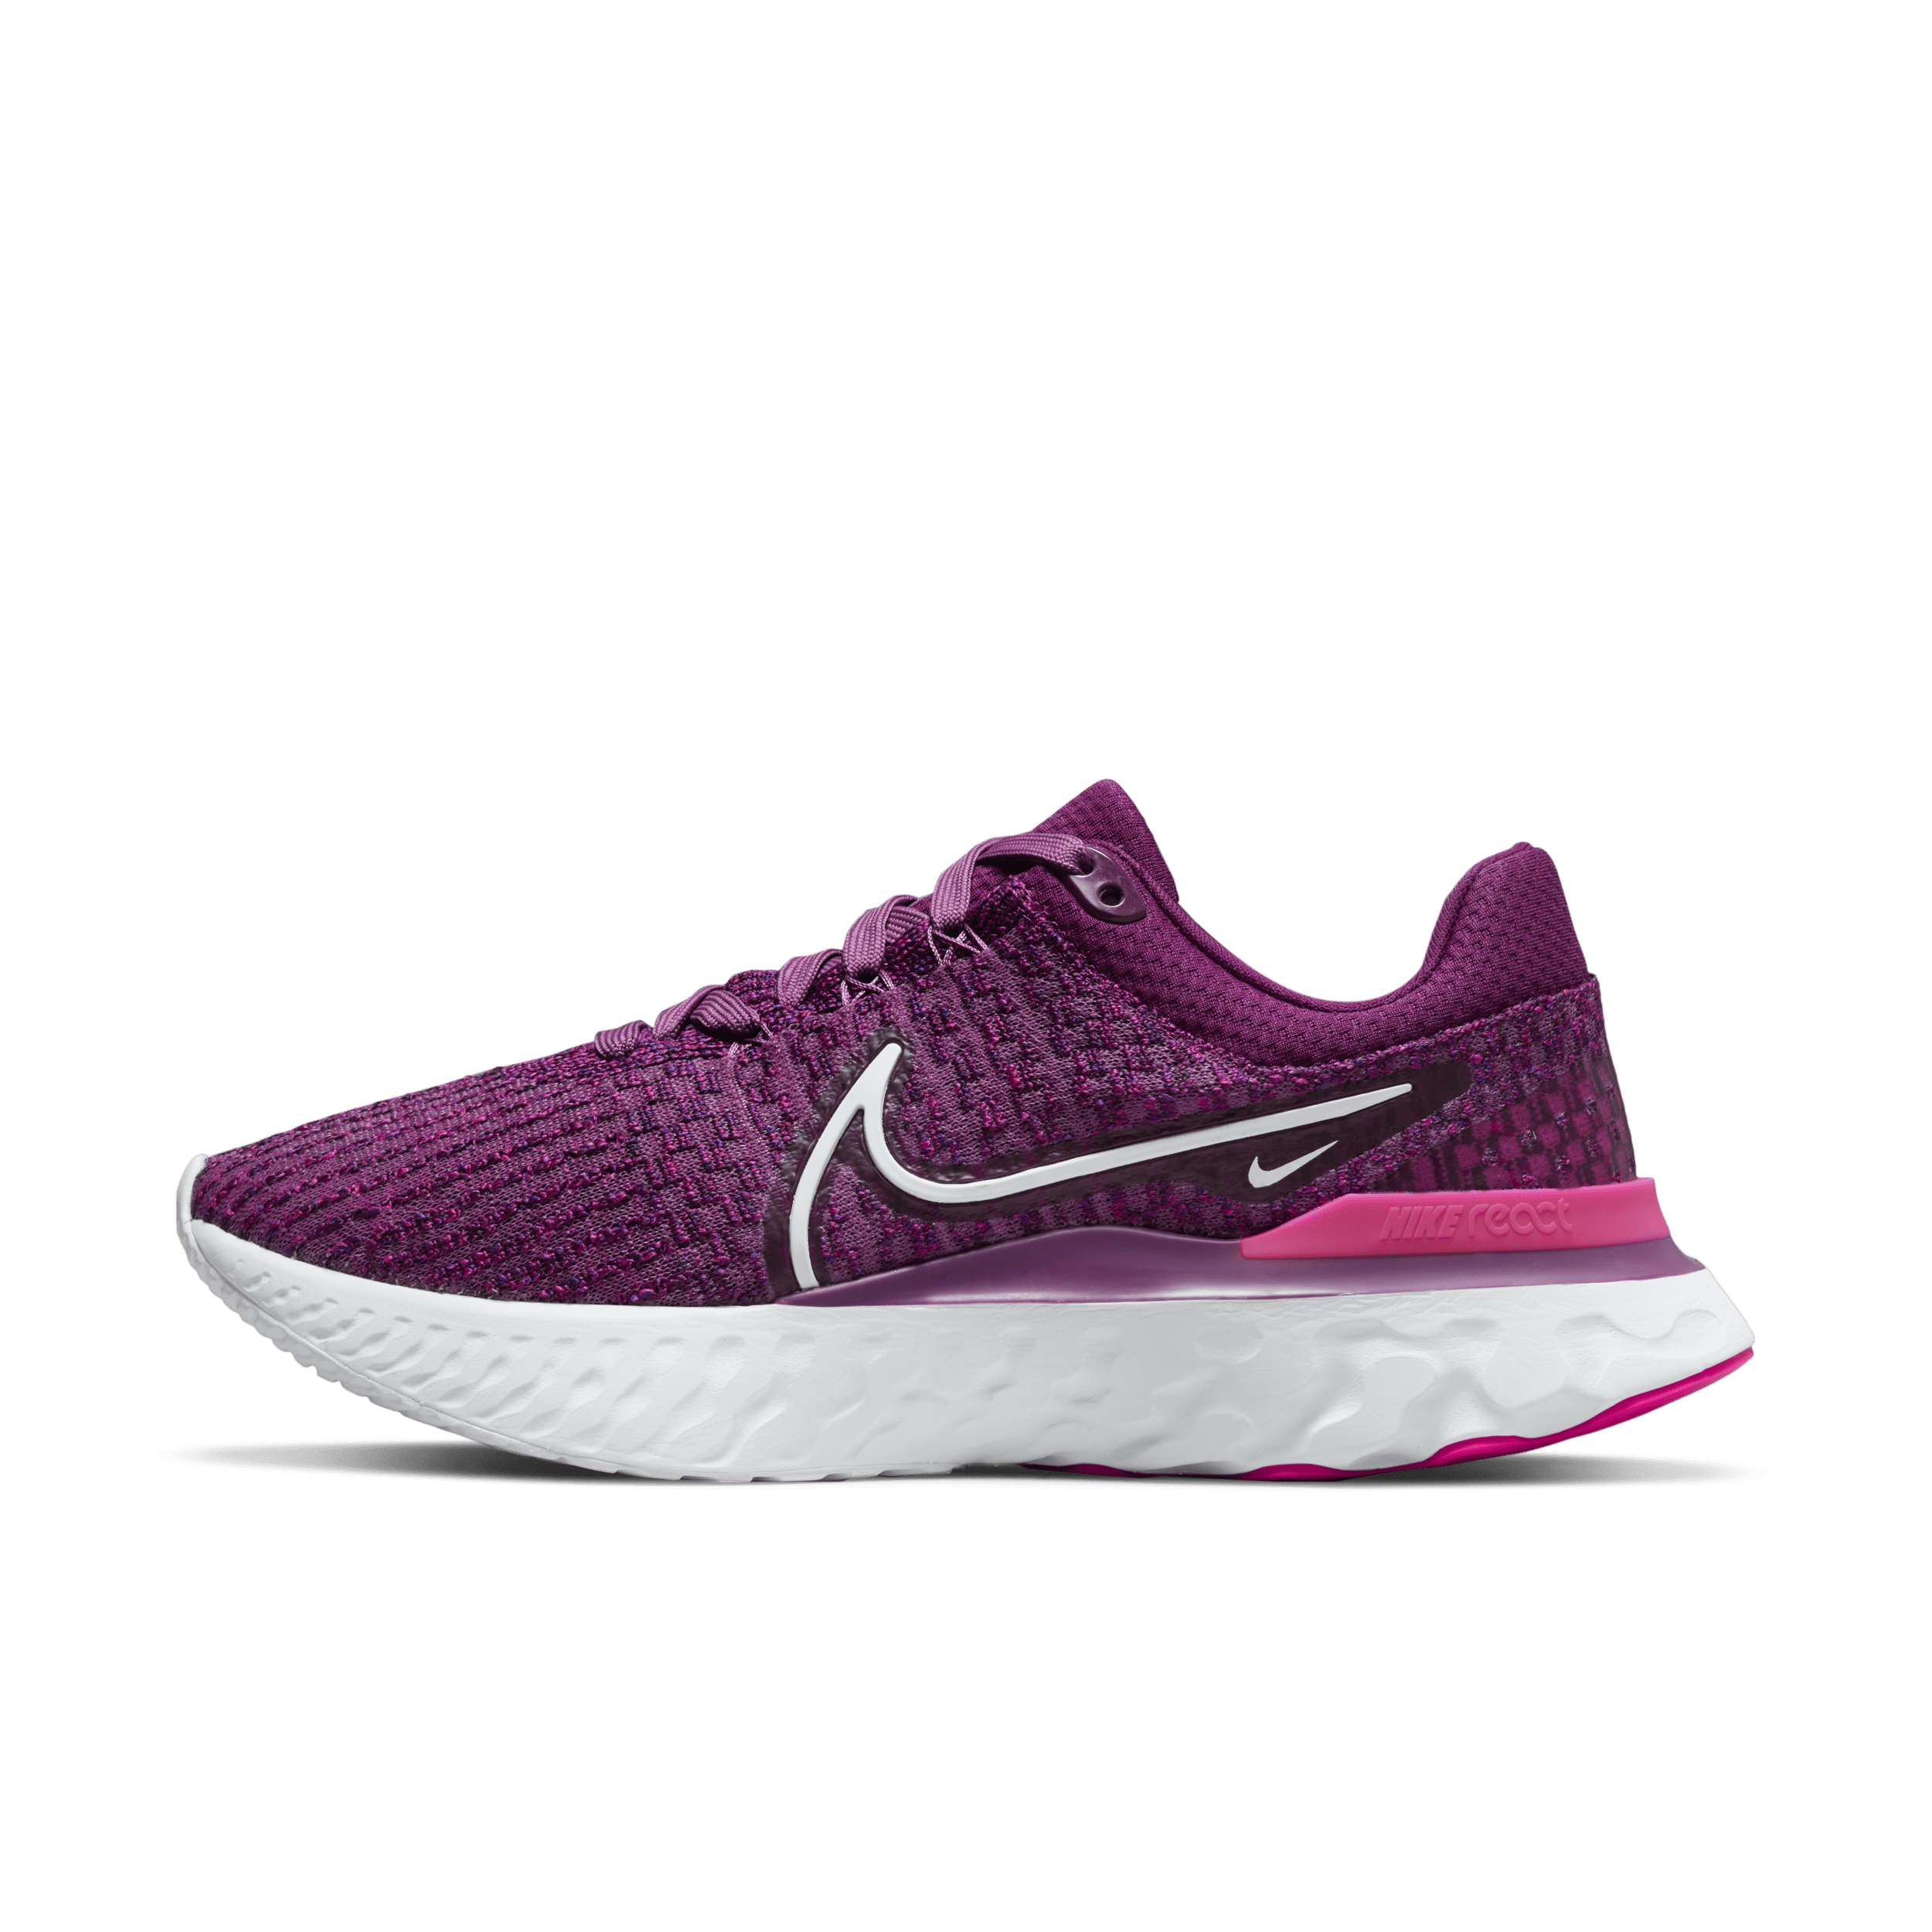 Still one of our most tested shoes, the Nike Infinity React 3 has soft and supportive cushioning. Its soft, stable feel with a smooth ride will carry you through routes, long and short. A breathable upper is made to feel contained, yet flexible. We even added more cushioning to the collar for a soft feel. Keep running, we've got you. A Secure, Breathable Flex::We added Flyknit throughout the upper, creating specific zones geared towards optimal breathability, flexibility and containment. The result is a cool feel that helps your foot feel secure, while letting it move without restriction. It still has Flywire technology for support through the midfoot.,Smooth and Steady::Nike React technology is a lightweight, durable foam that delivers a smooth, responsive ride. Shaped like a rocker, the foam provides support for the 3 phases of a runner's stride. It offers flexibility when your foot rises off the ground, a smooth ride when your foot is moving forwards and cushioning at ground contact. Its wide shape provides a more stable ride, helping release energy with every step.,Cushioned Feel, Higher Heights::Less material between the insole and midsole means you're closer to the foam. This helps create a more responsive experience. The foam itself has a higher height, providing a plush feel. More A hybrid tongue combines a sock-like feel with the adjustability of a traditional design.Soft padding along the collar provides a cushioned touch point.Increased rubber on the outsole helps deliver traction and durability.